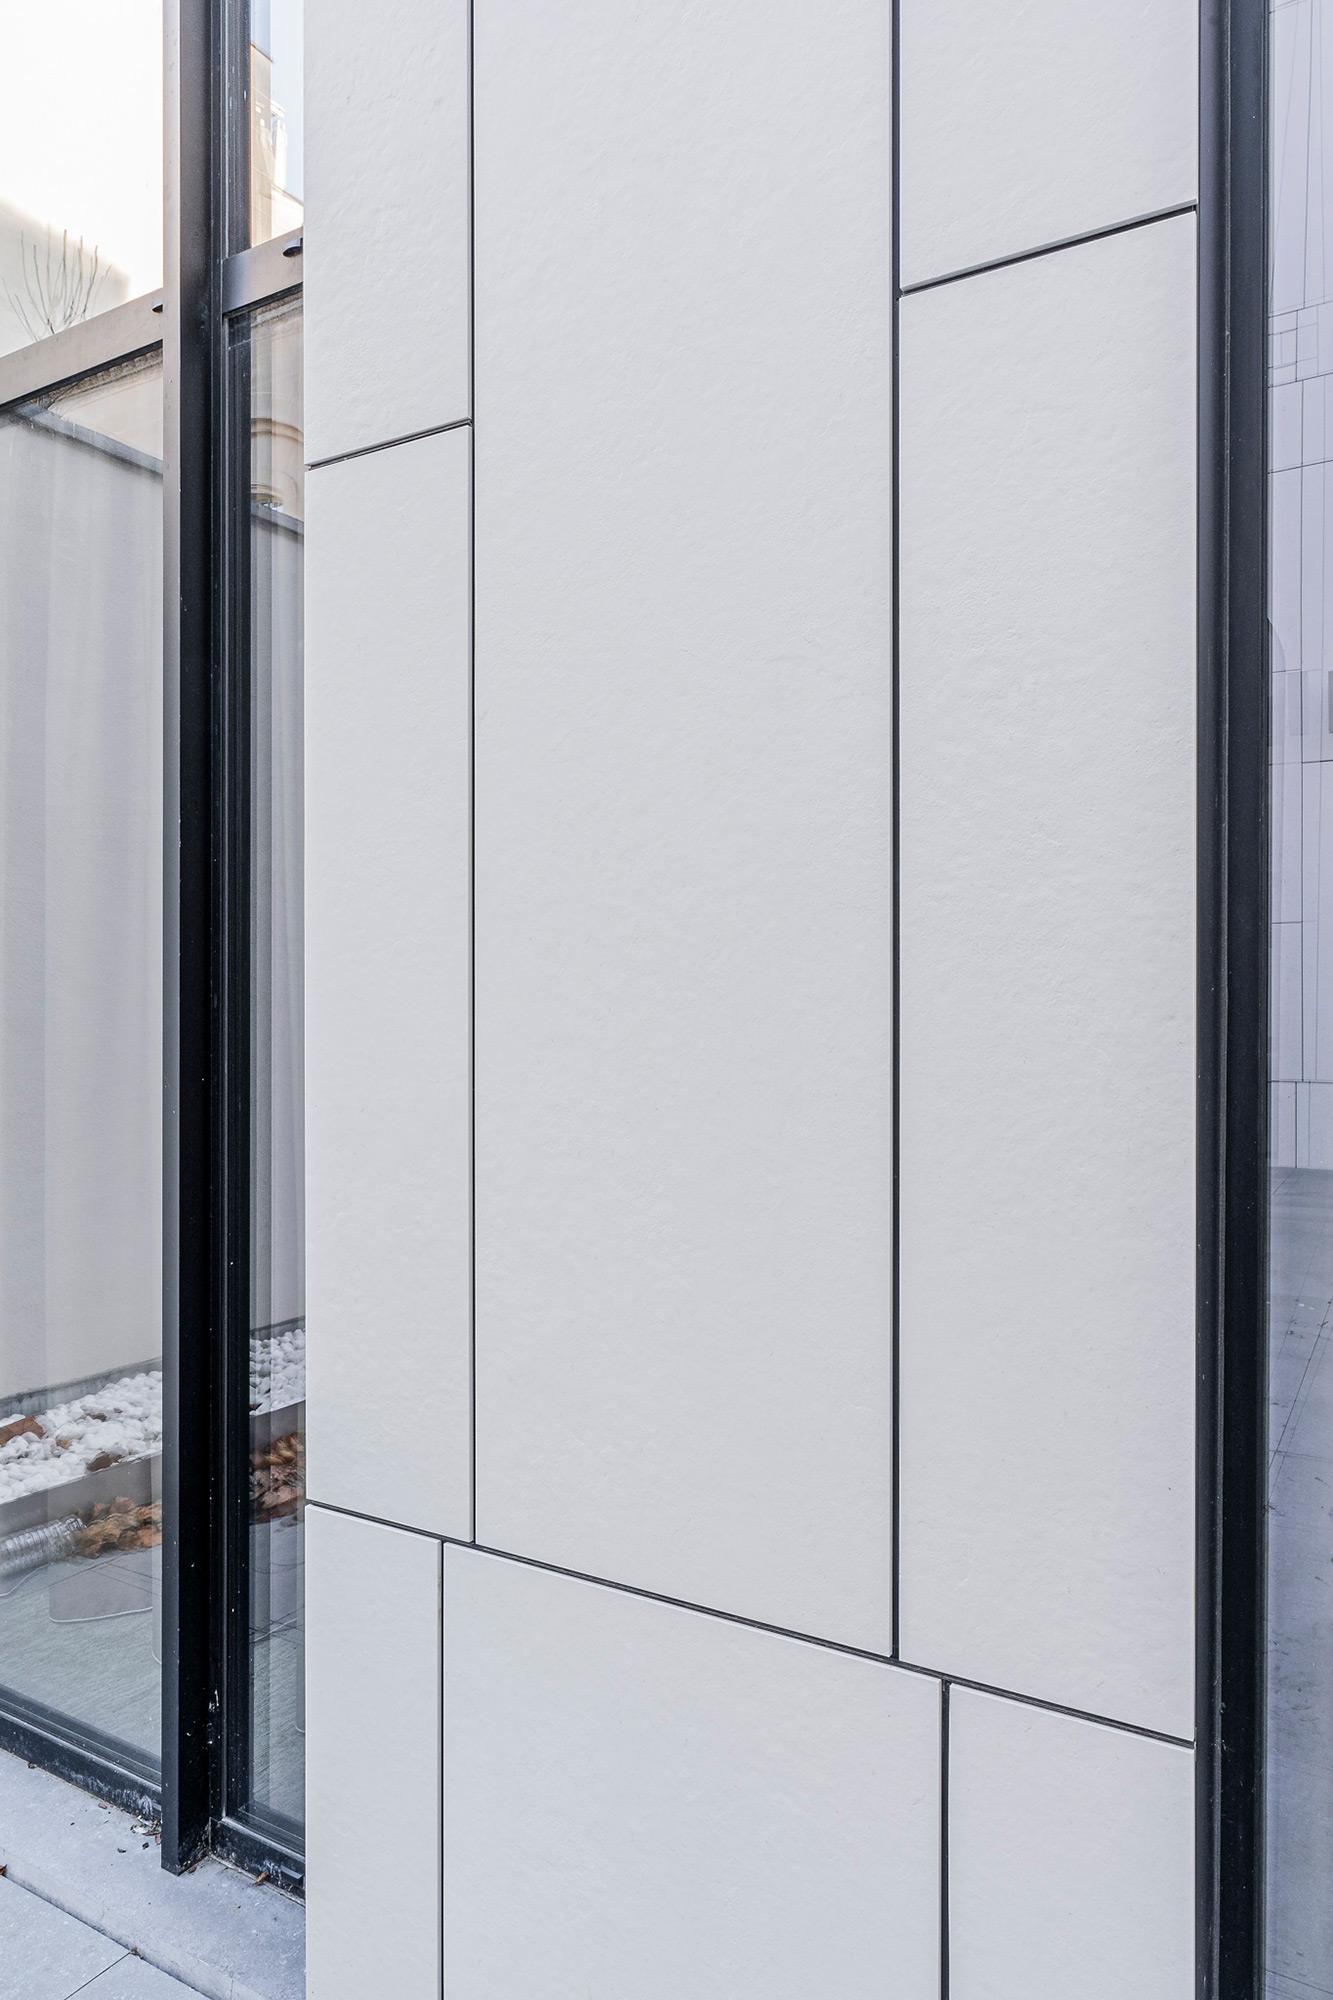 Image of TheDuke LR 10 in Reflections in Dekton: the renovation of the classicist building The Duke in Brussels - Cosentino